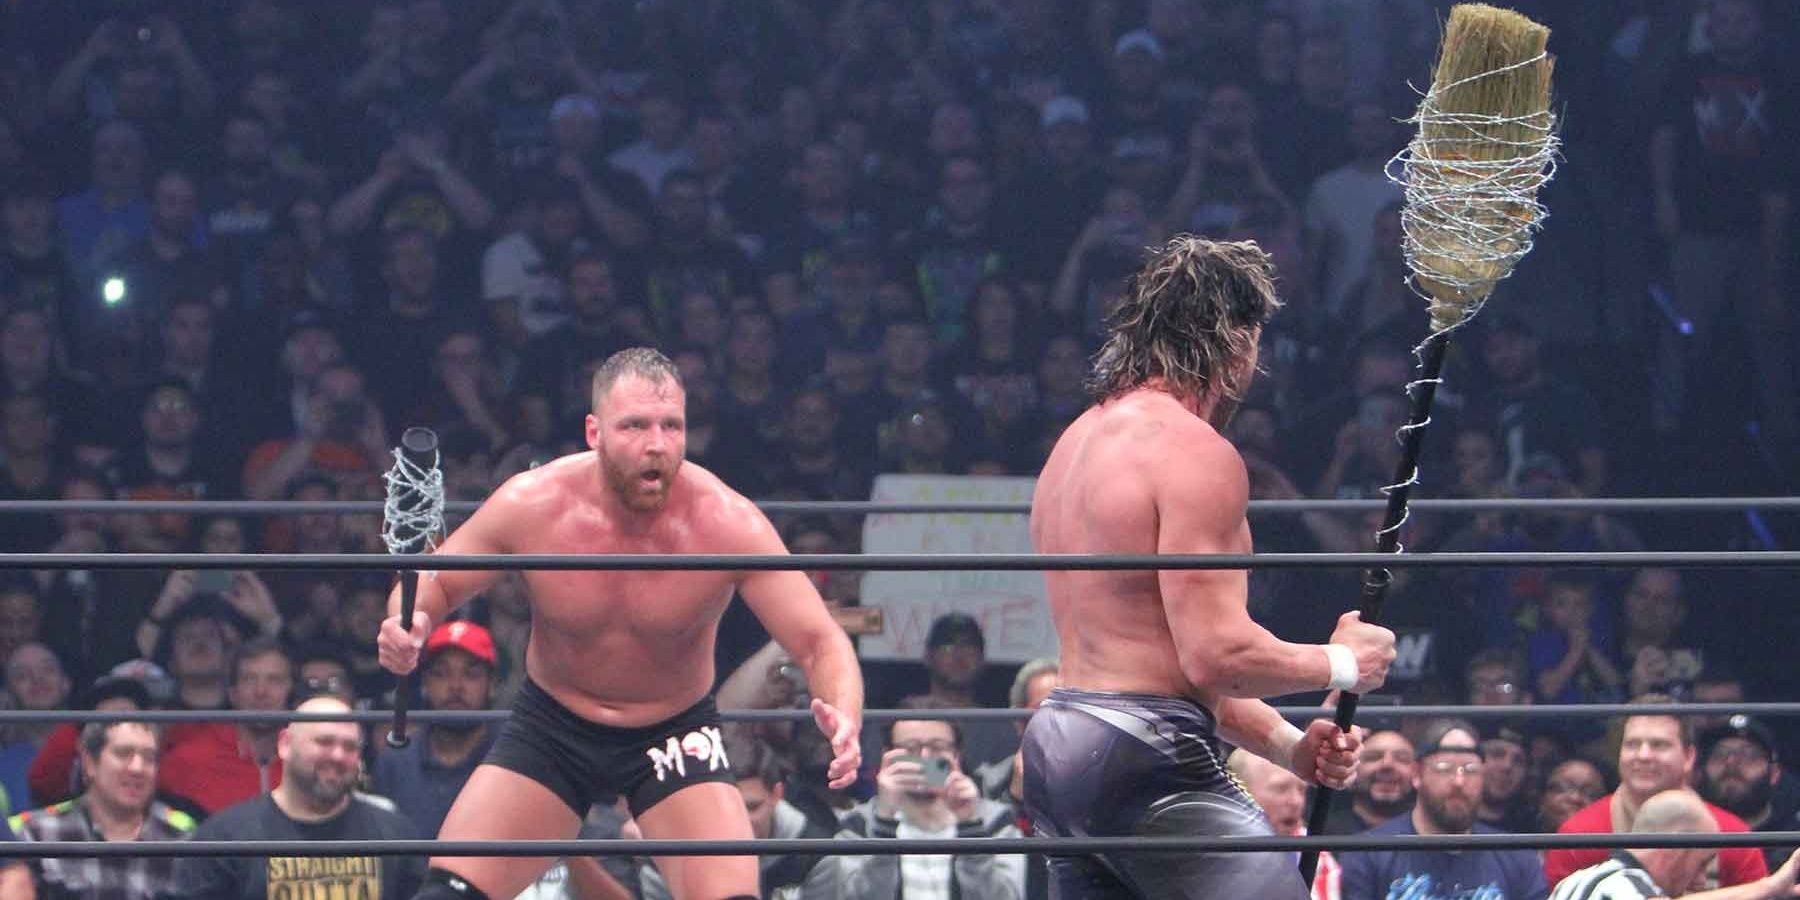 Omega and Moxley